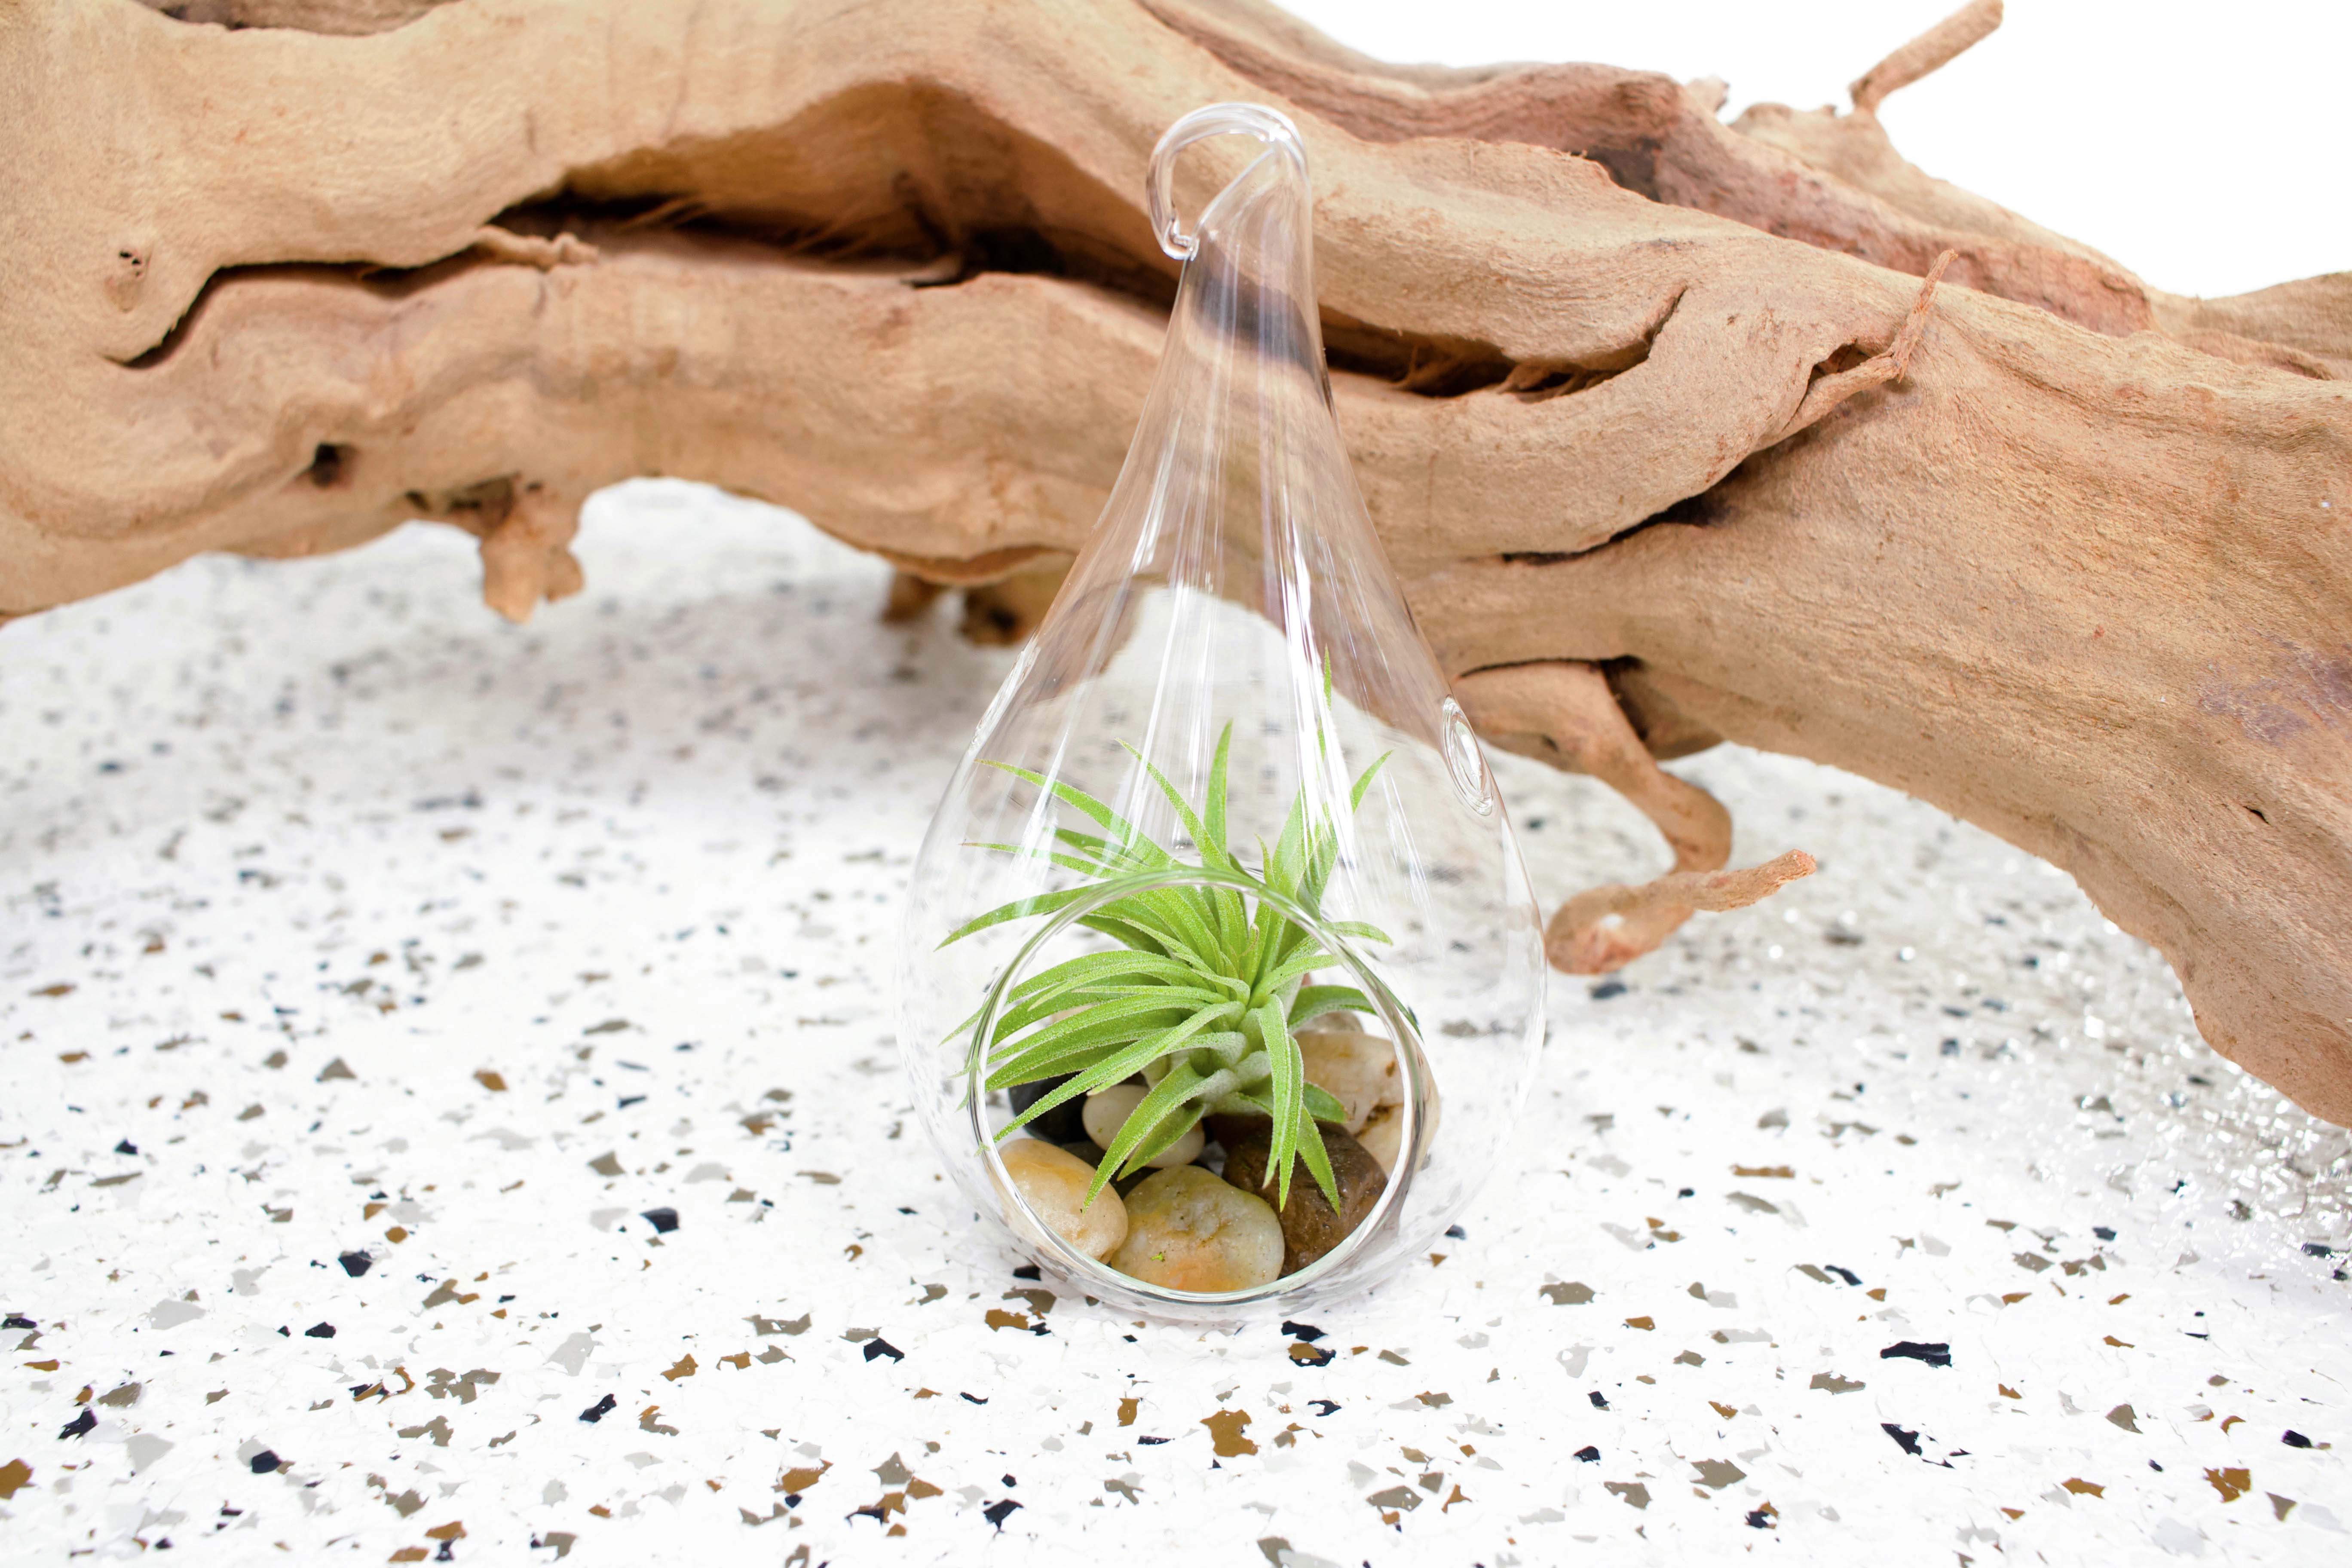 Glass Teardrop Terrariums with River Stones and Tillandsia Ionantha Air Plant